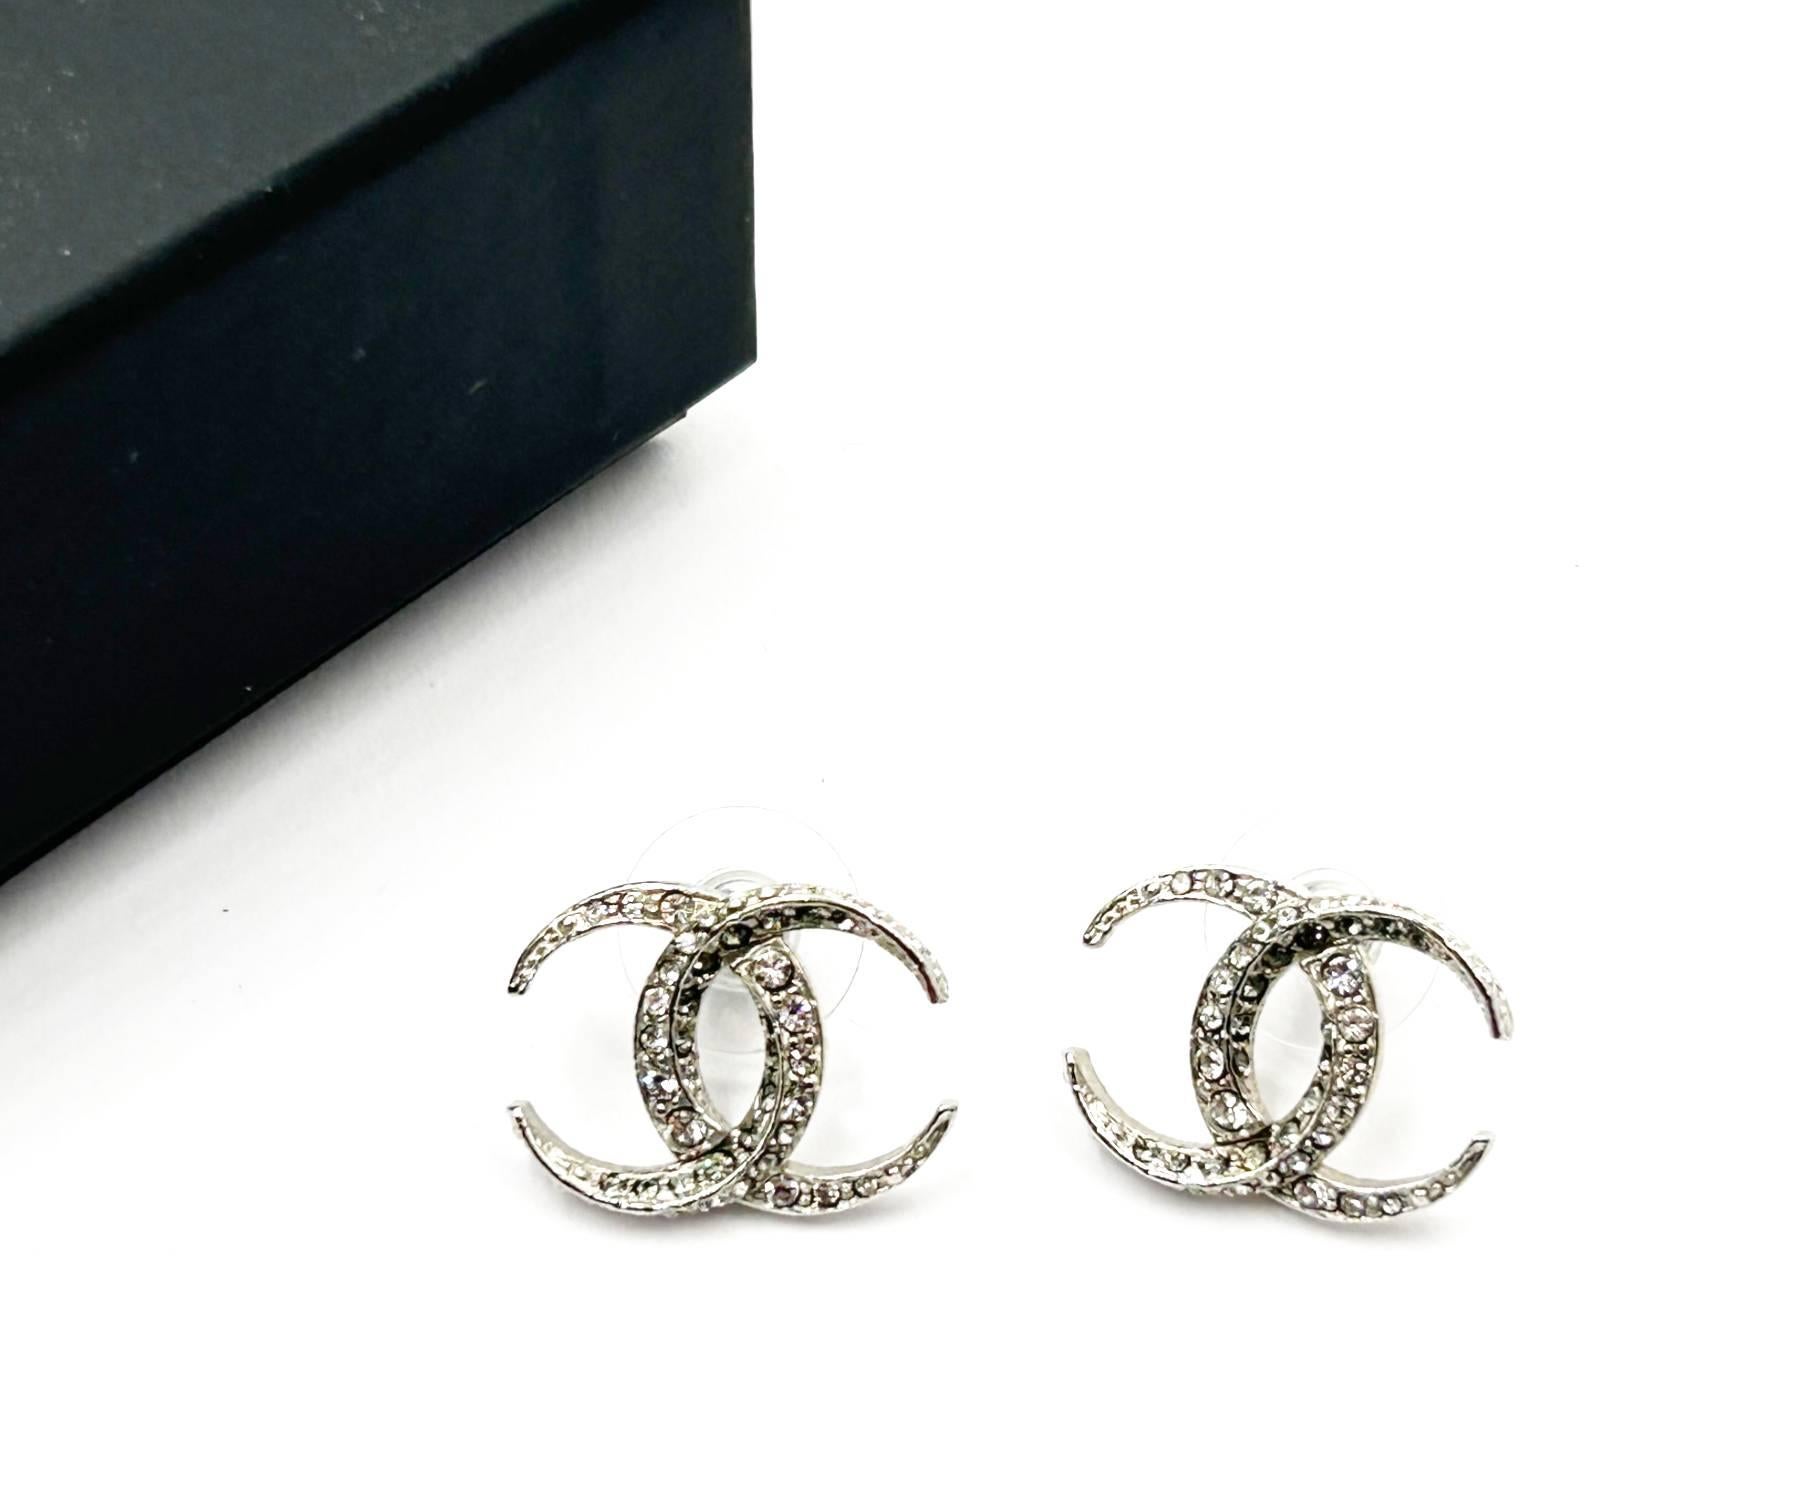 Chanel Silver CC Dubai Moonlight Crystal Piercing Earrings

* Marked 15
* Made in Italy
* Comes with original box and pouch

-Approximately 0.9